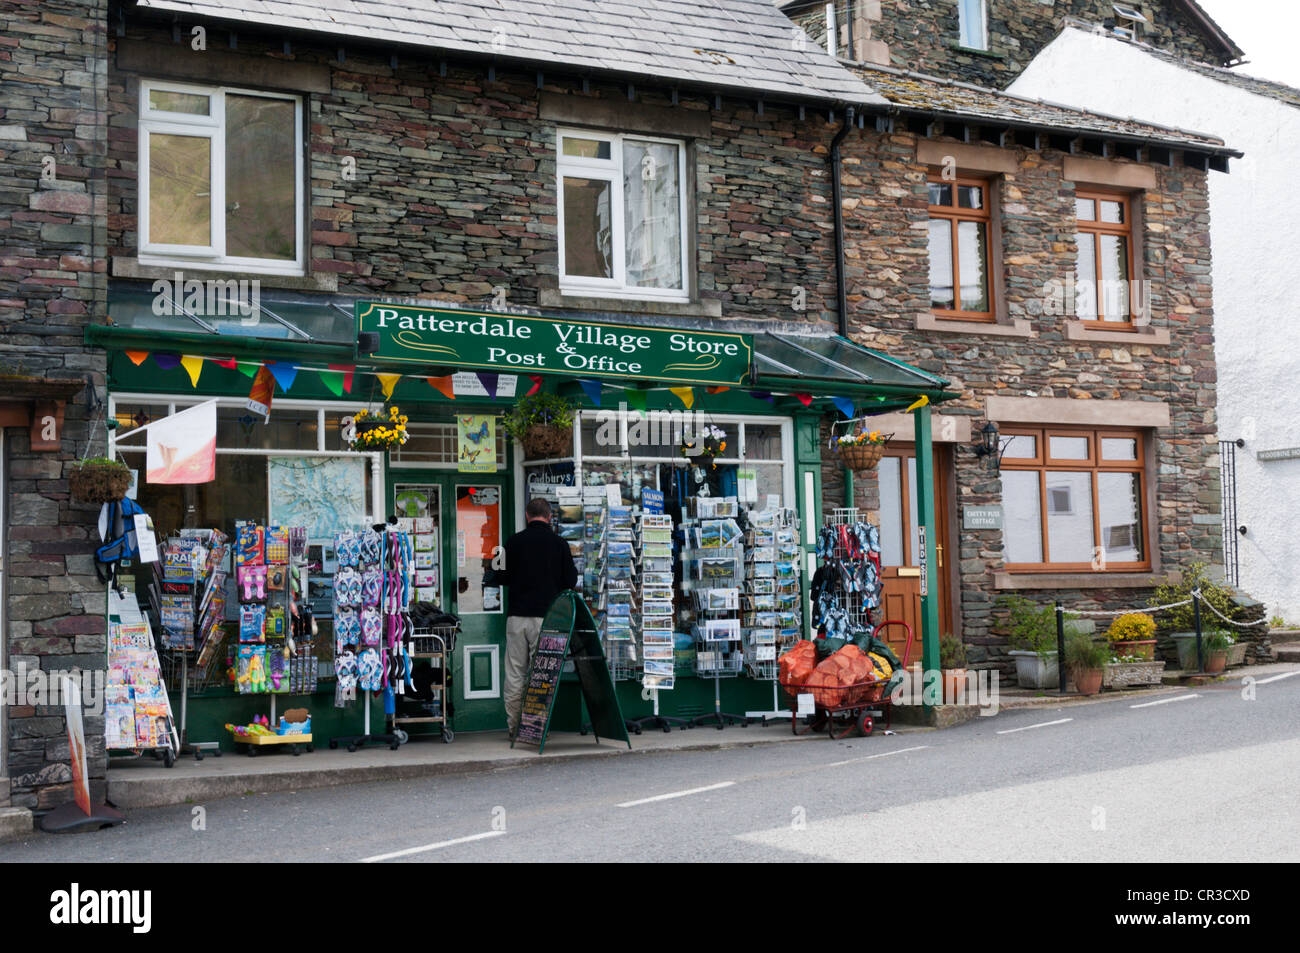 Patterdale Post Office was the first place to sell the famous Lake District walking books of Alfred Wainwright. Stock Photo